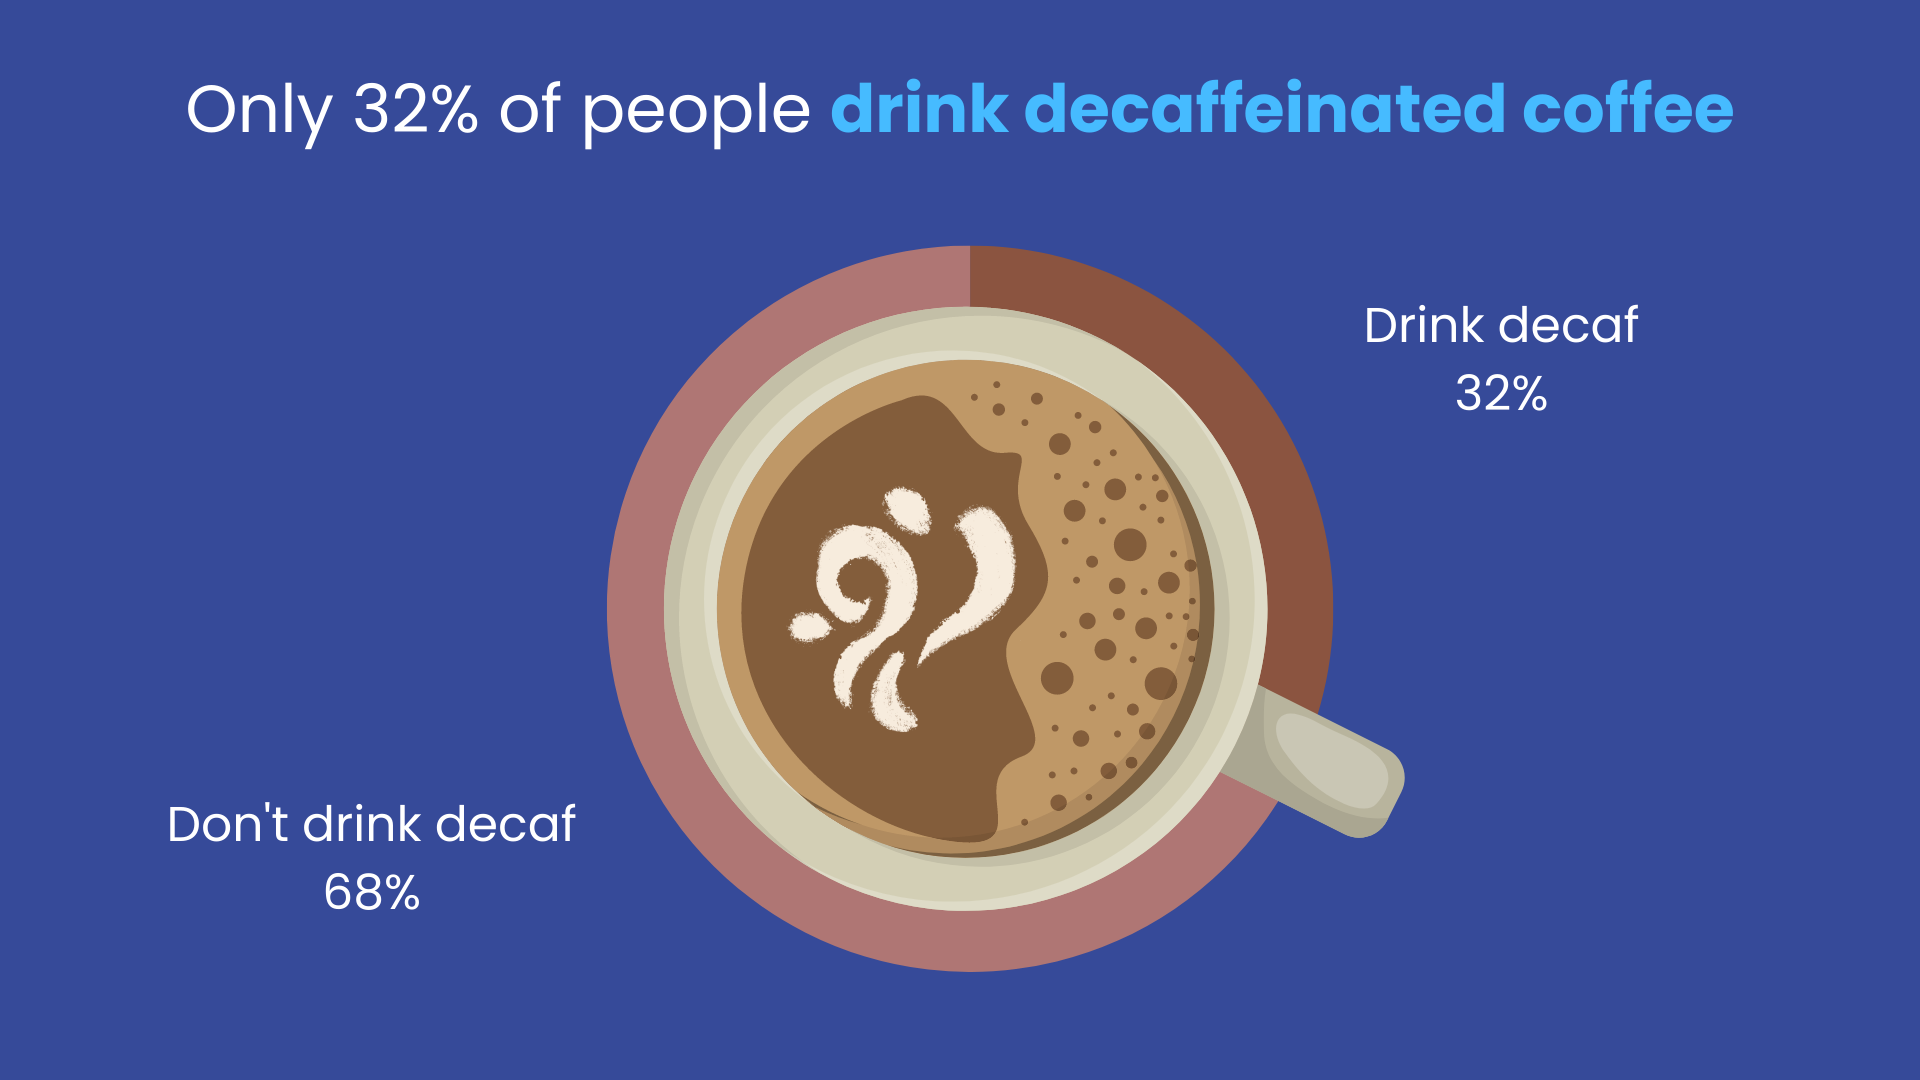 Only 32% of people drink decaffeinated coffee